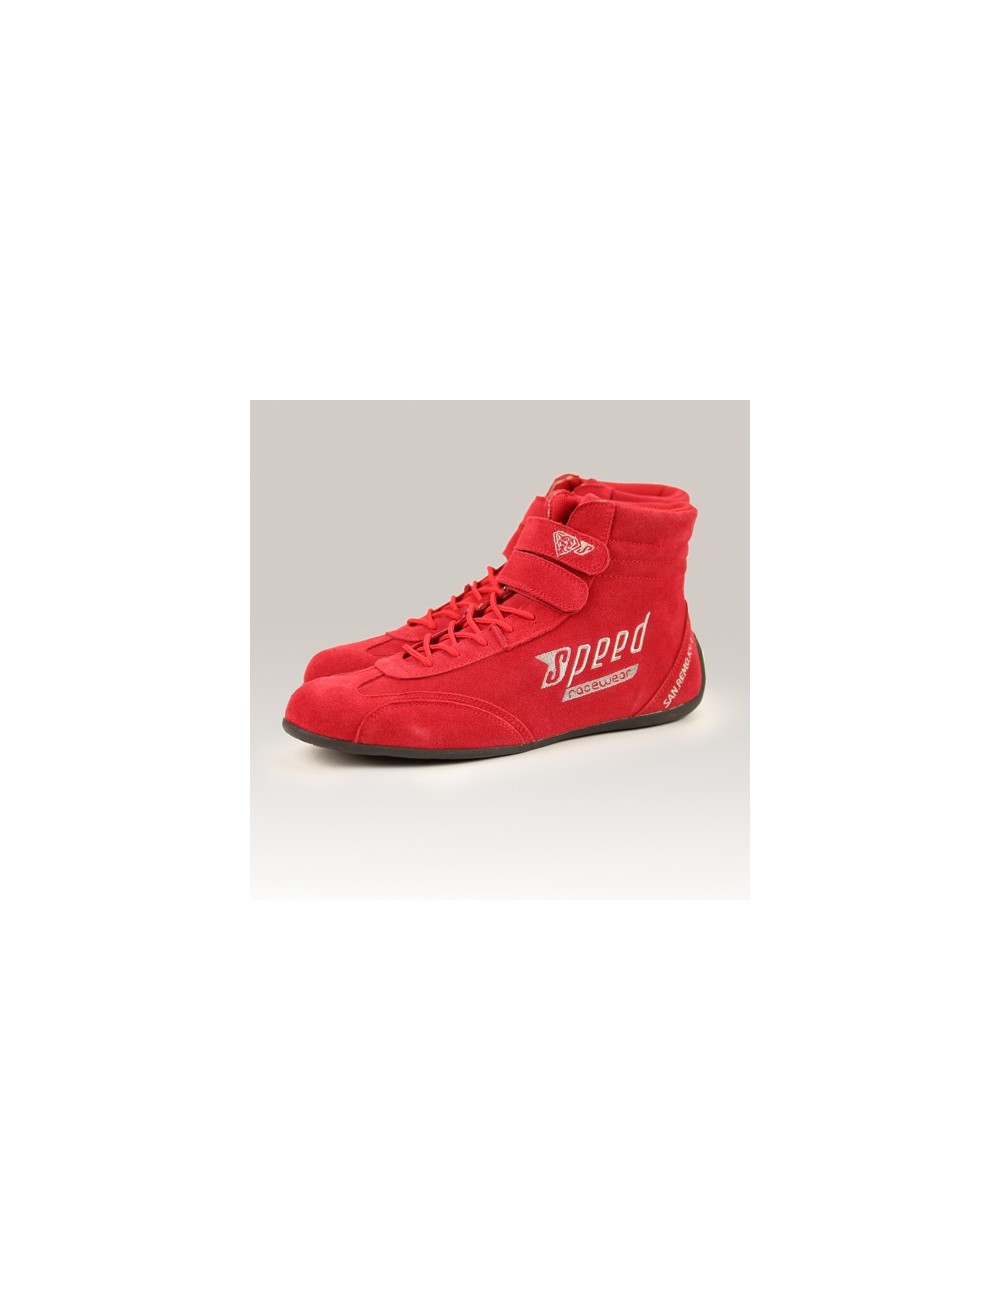 SPEED shoes San Remo KS-1 red